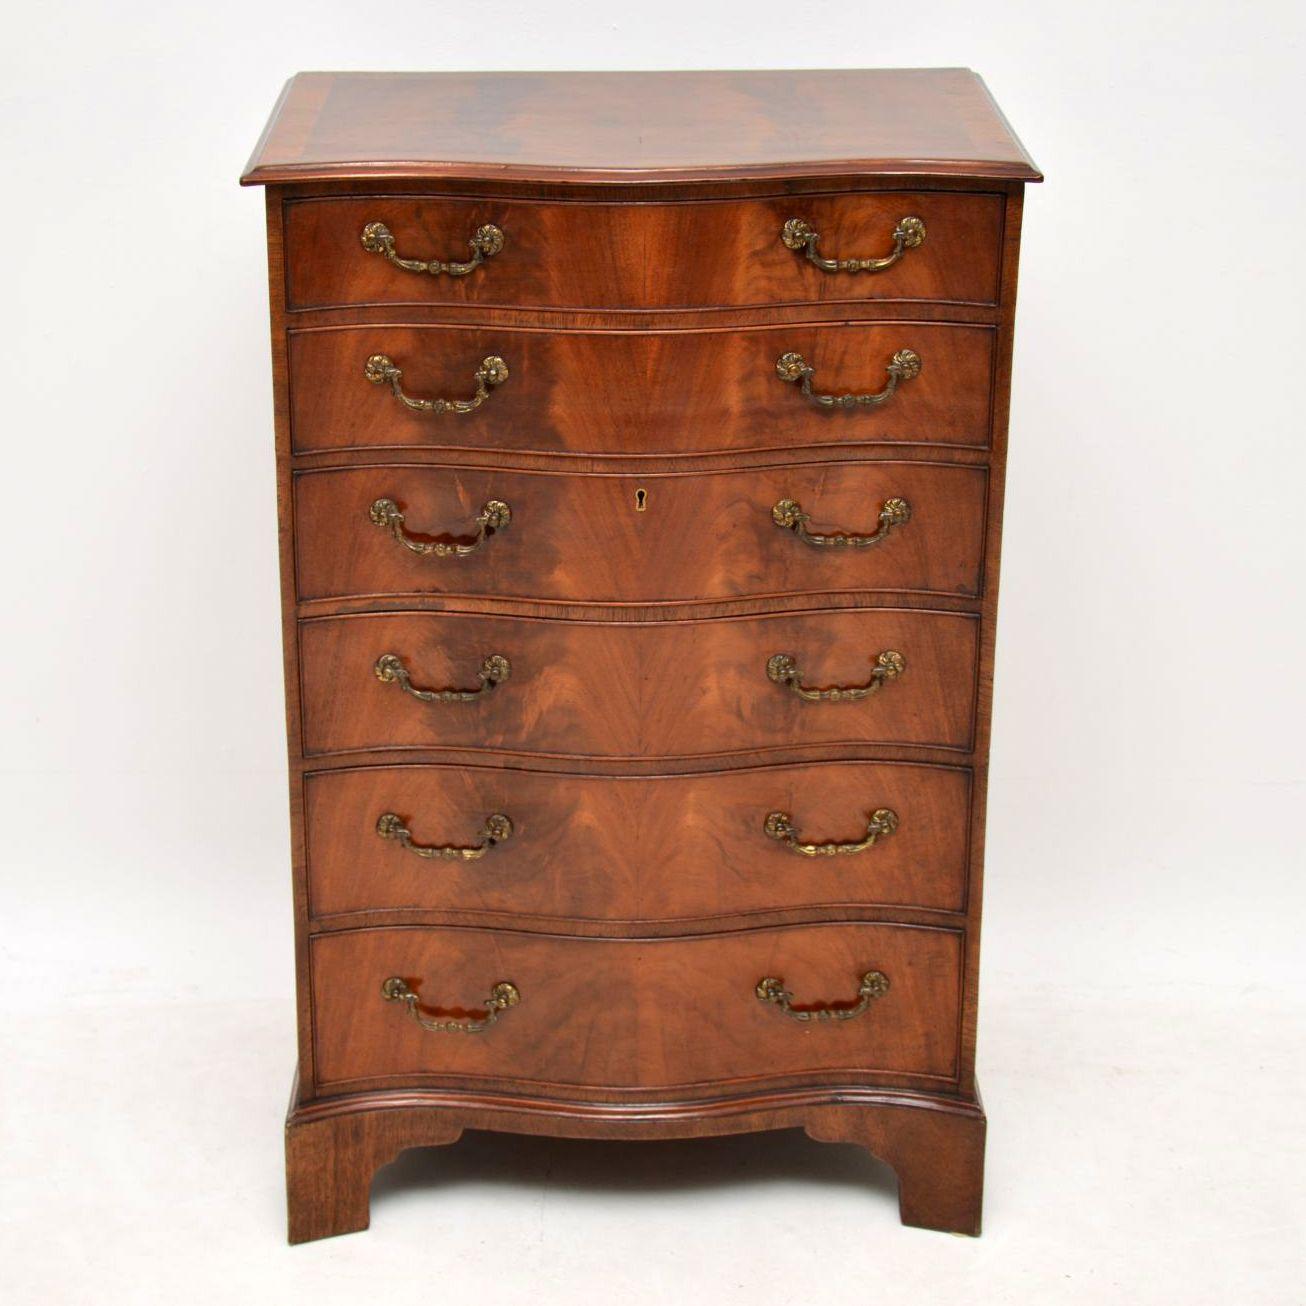 This antique mahogany serpentine fronted chest of drawers is of very fine quality & I would date it to around the 1920-30’s period. The top & the front are a vivid flame mahogany, with cross banded top edge & a beautiful grain pattern running all